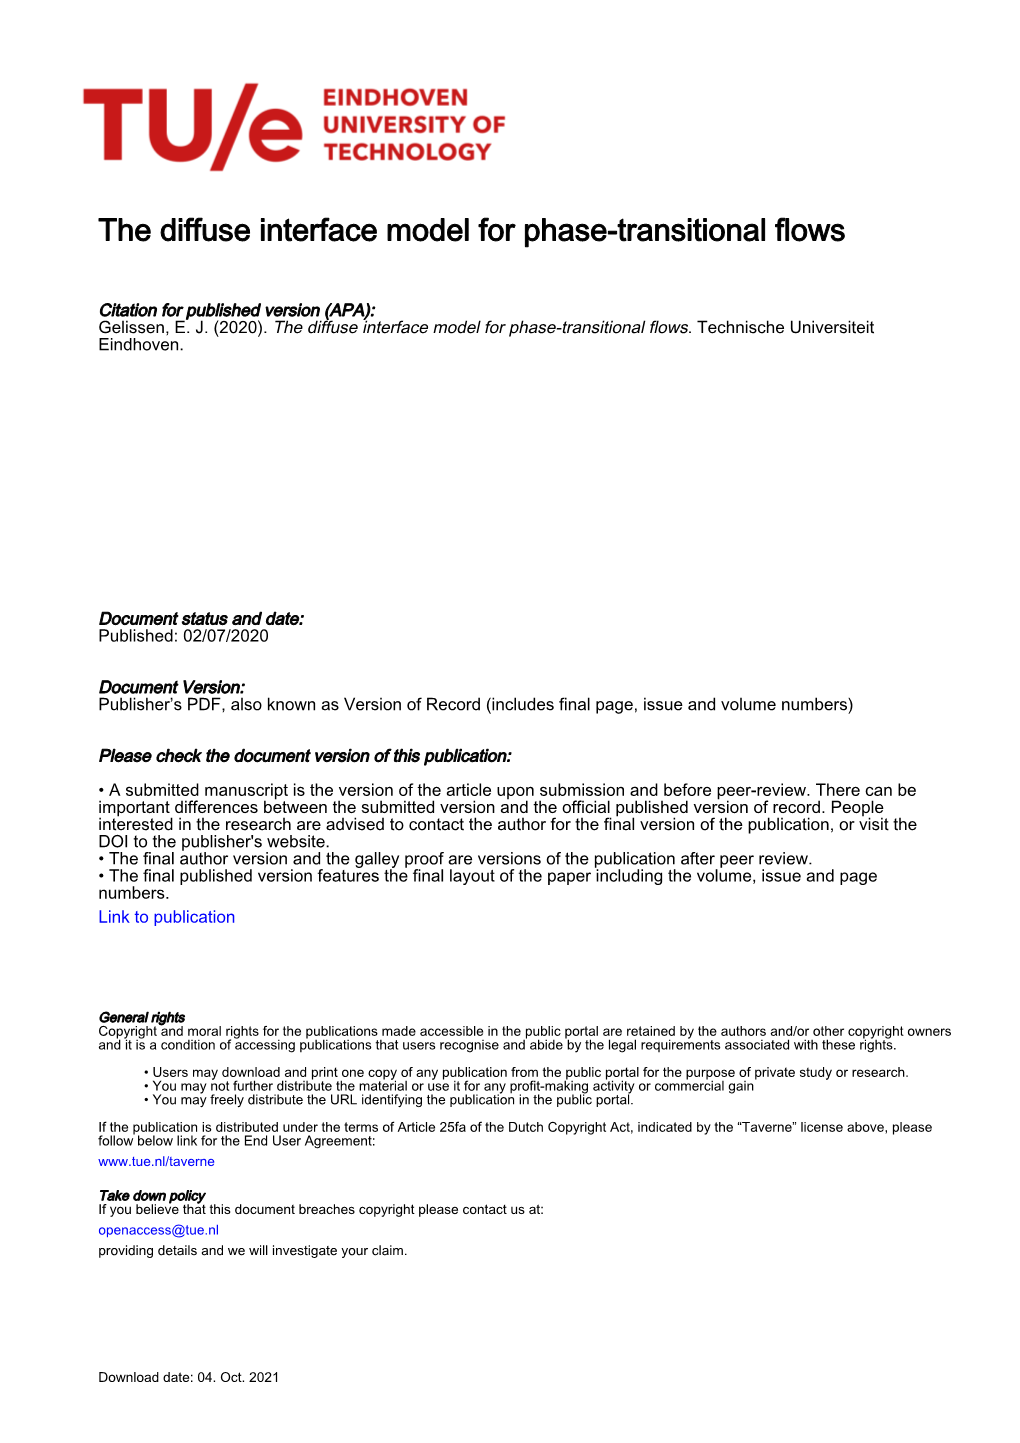 The Diffuse Interface Model for Phase-Transitional Flows